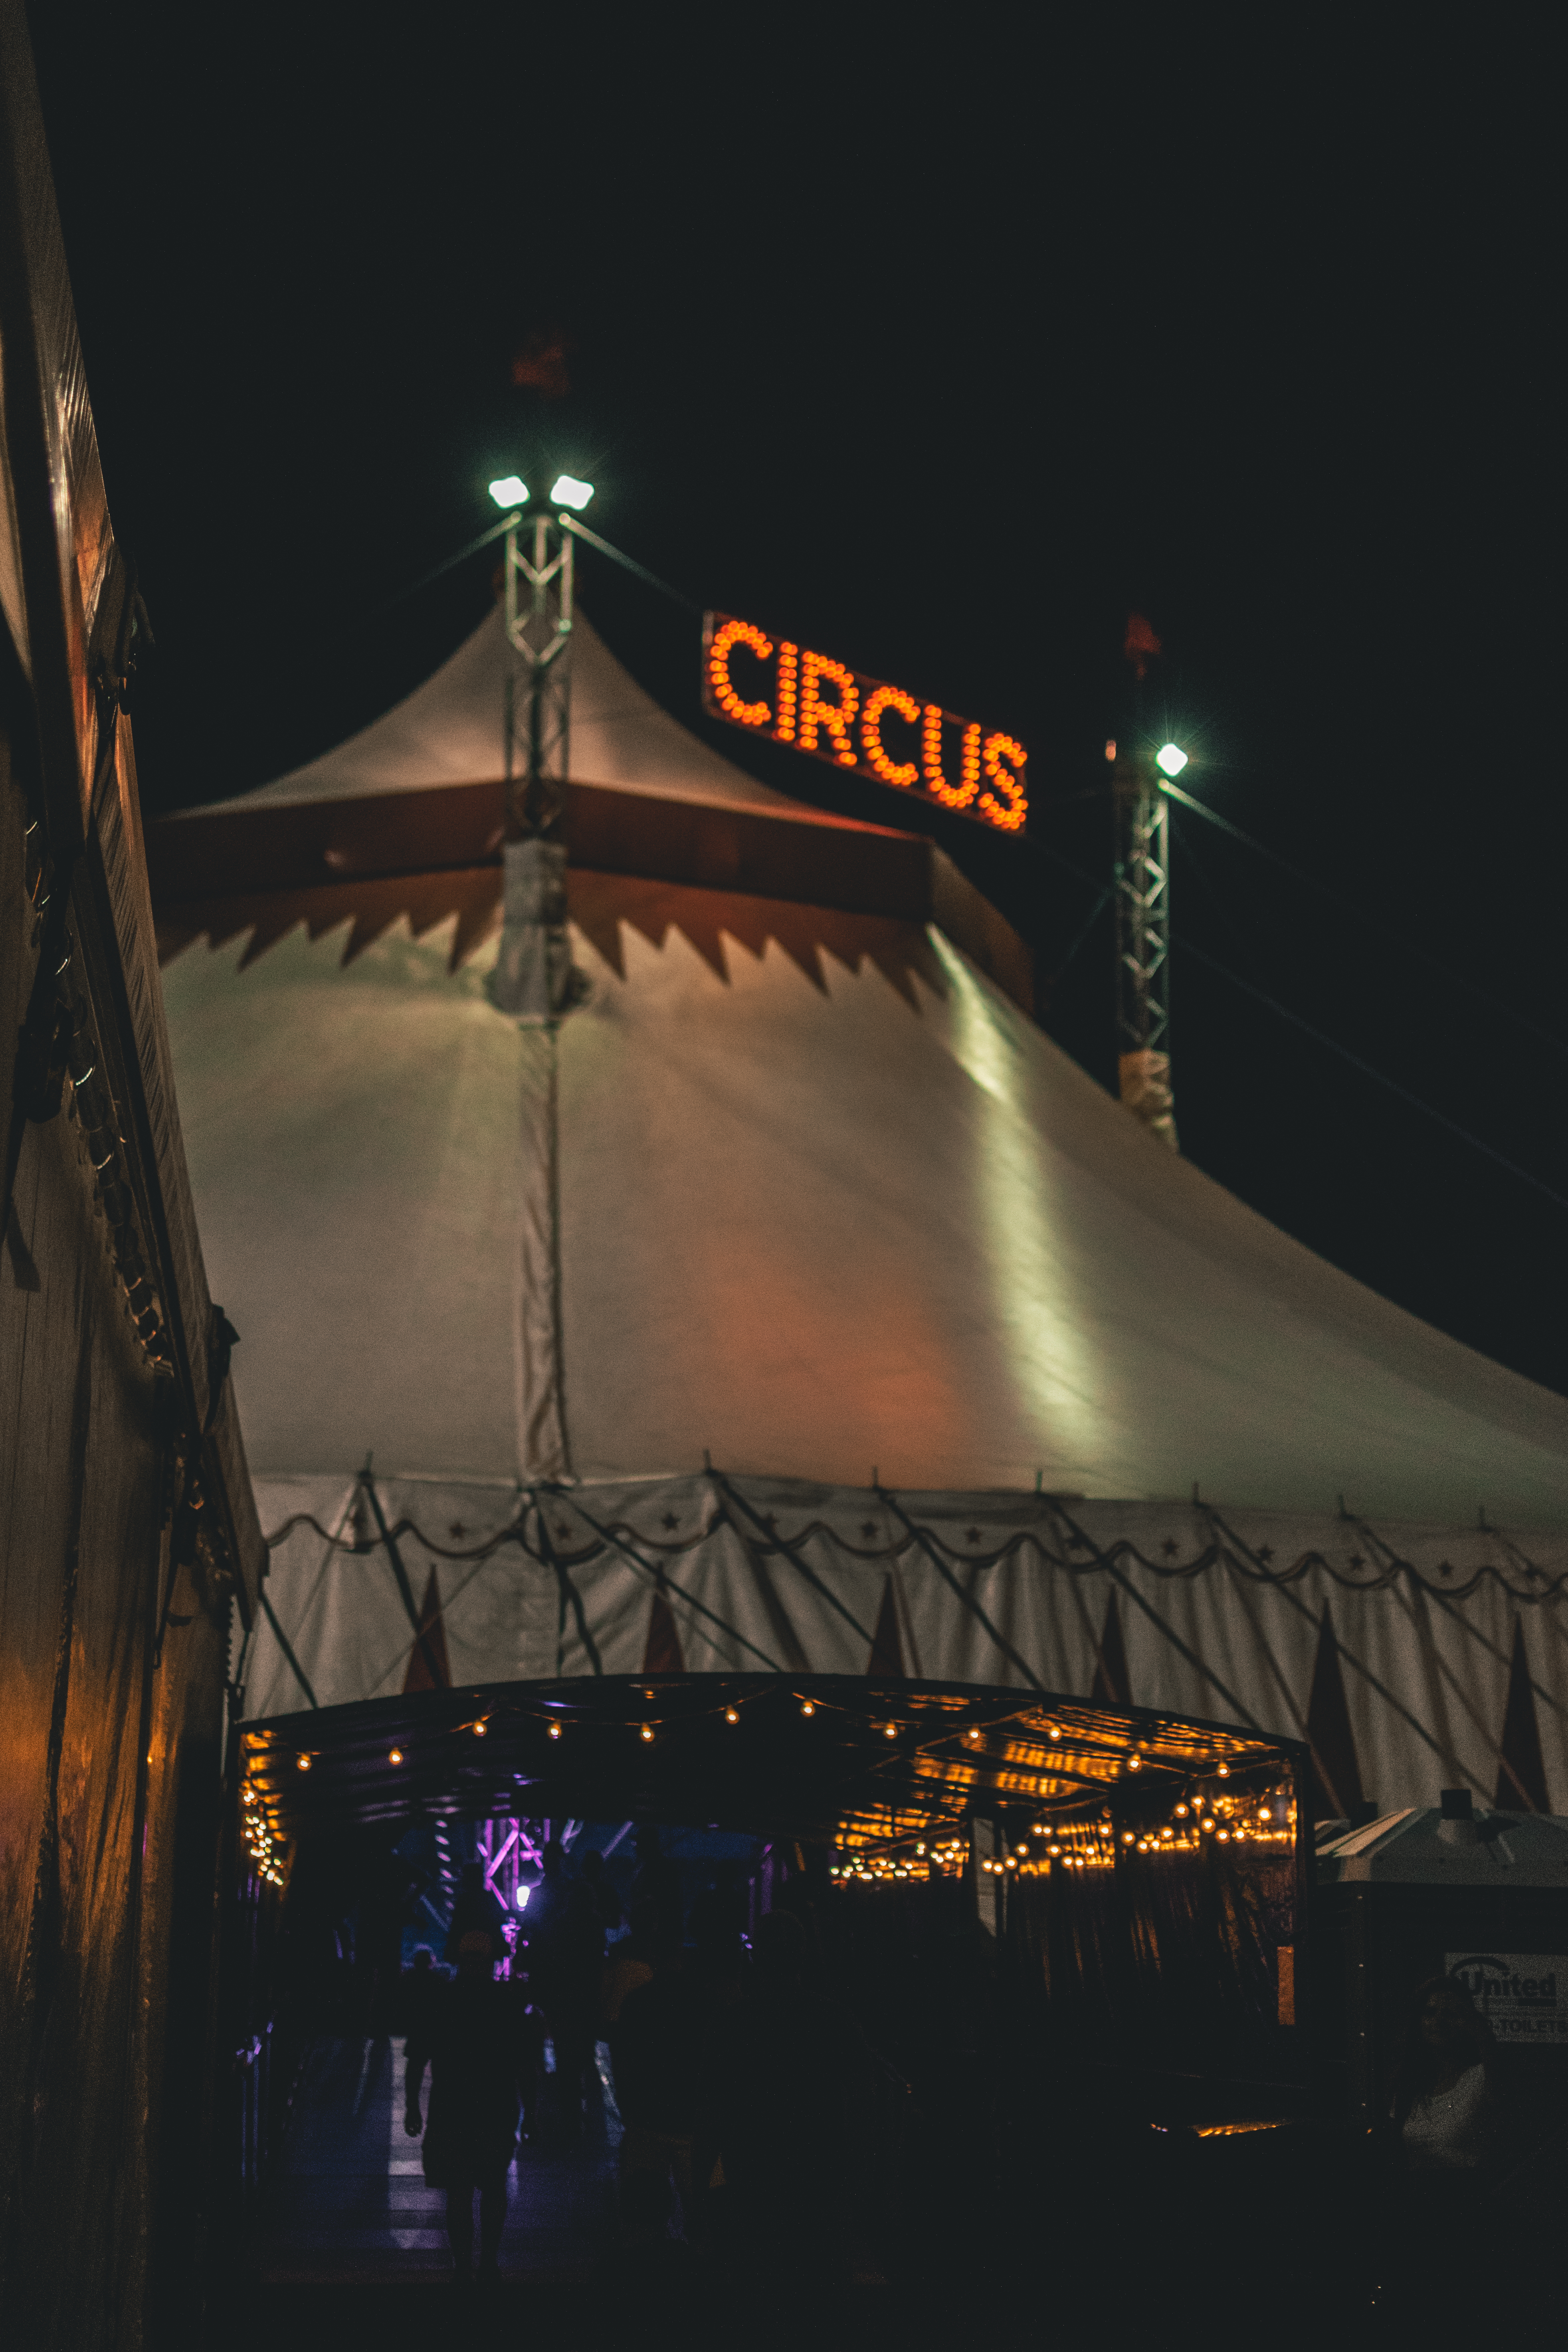 Gray Circus Tent during Nighttime · Free